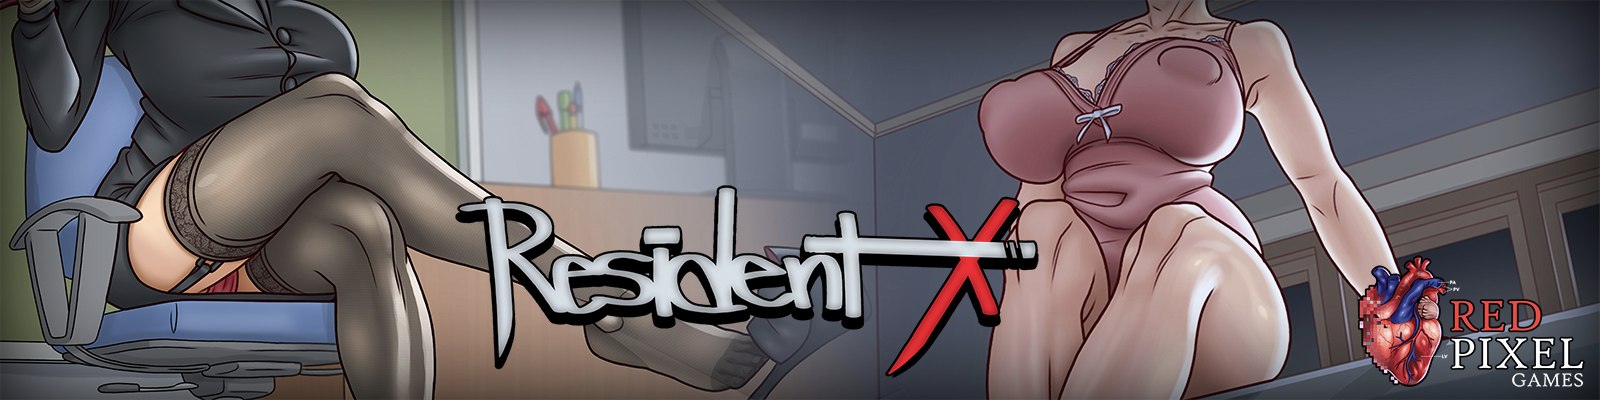 Resident X [Red Pixel Games]Adult xxx Game Download